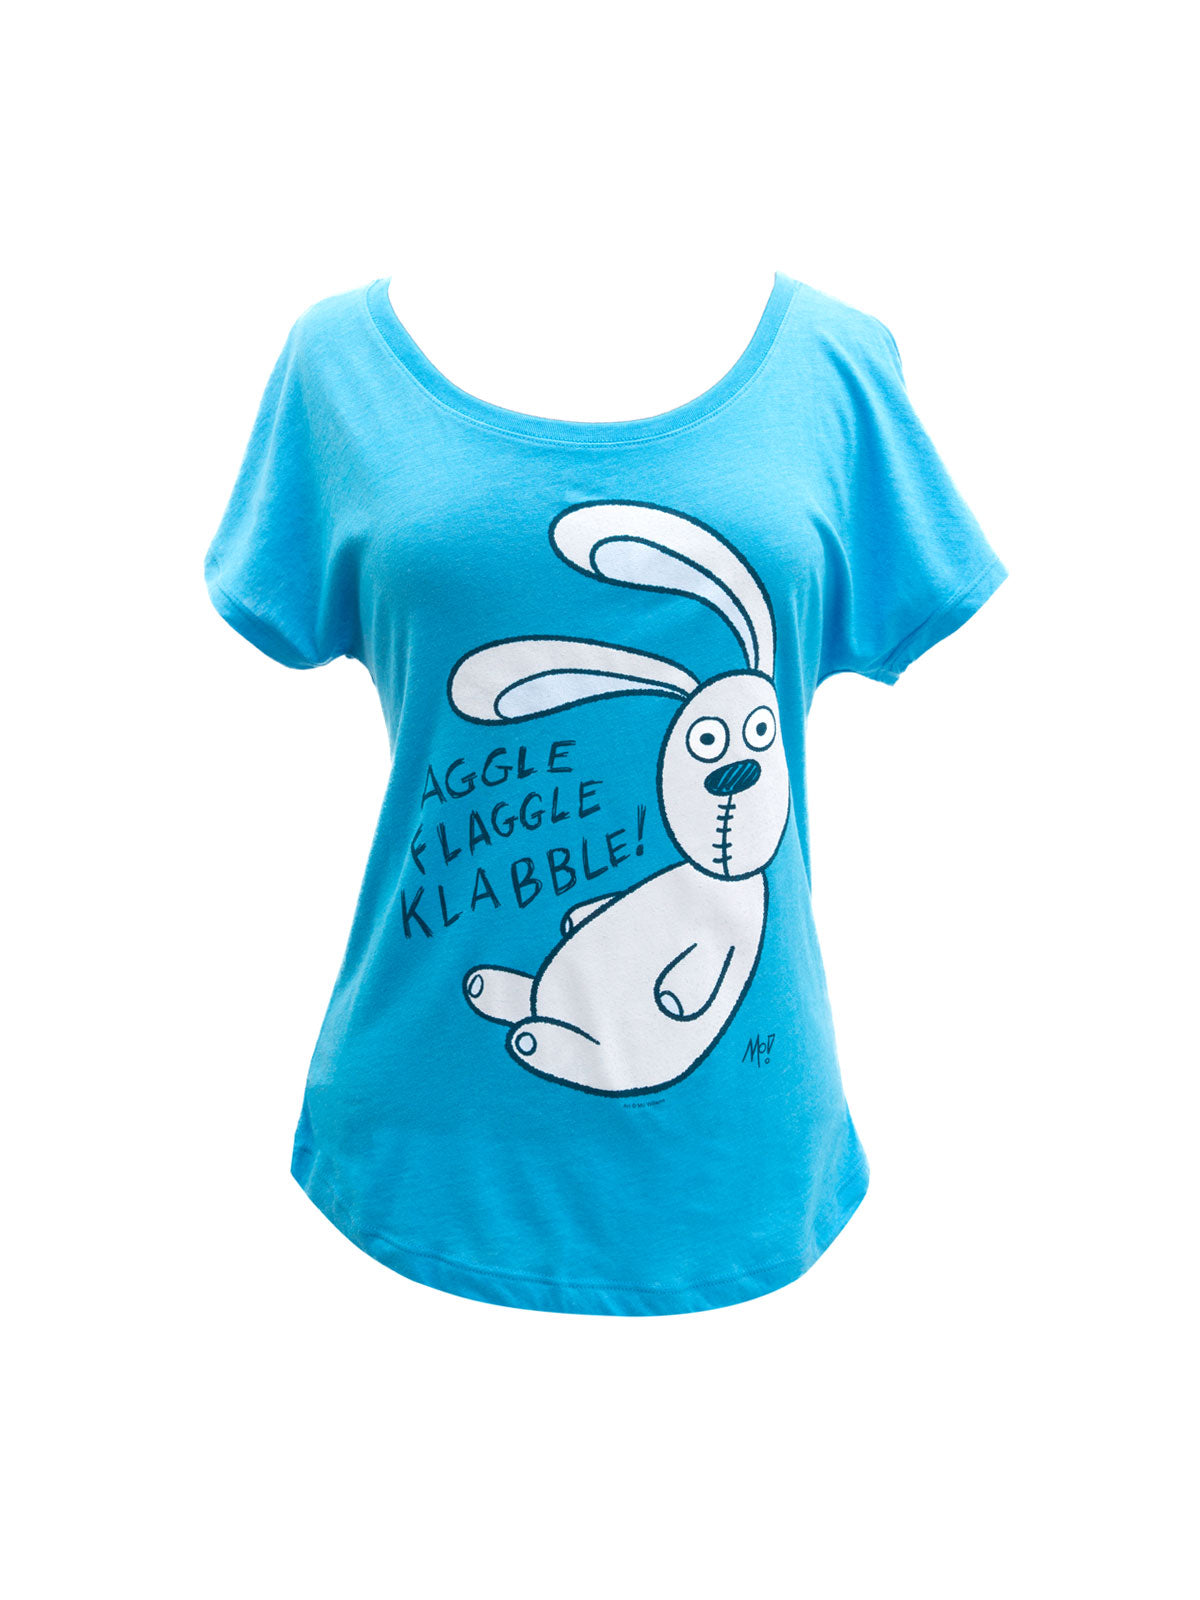 Knuffle bunny womens relaxed fit t